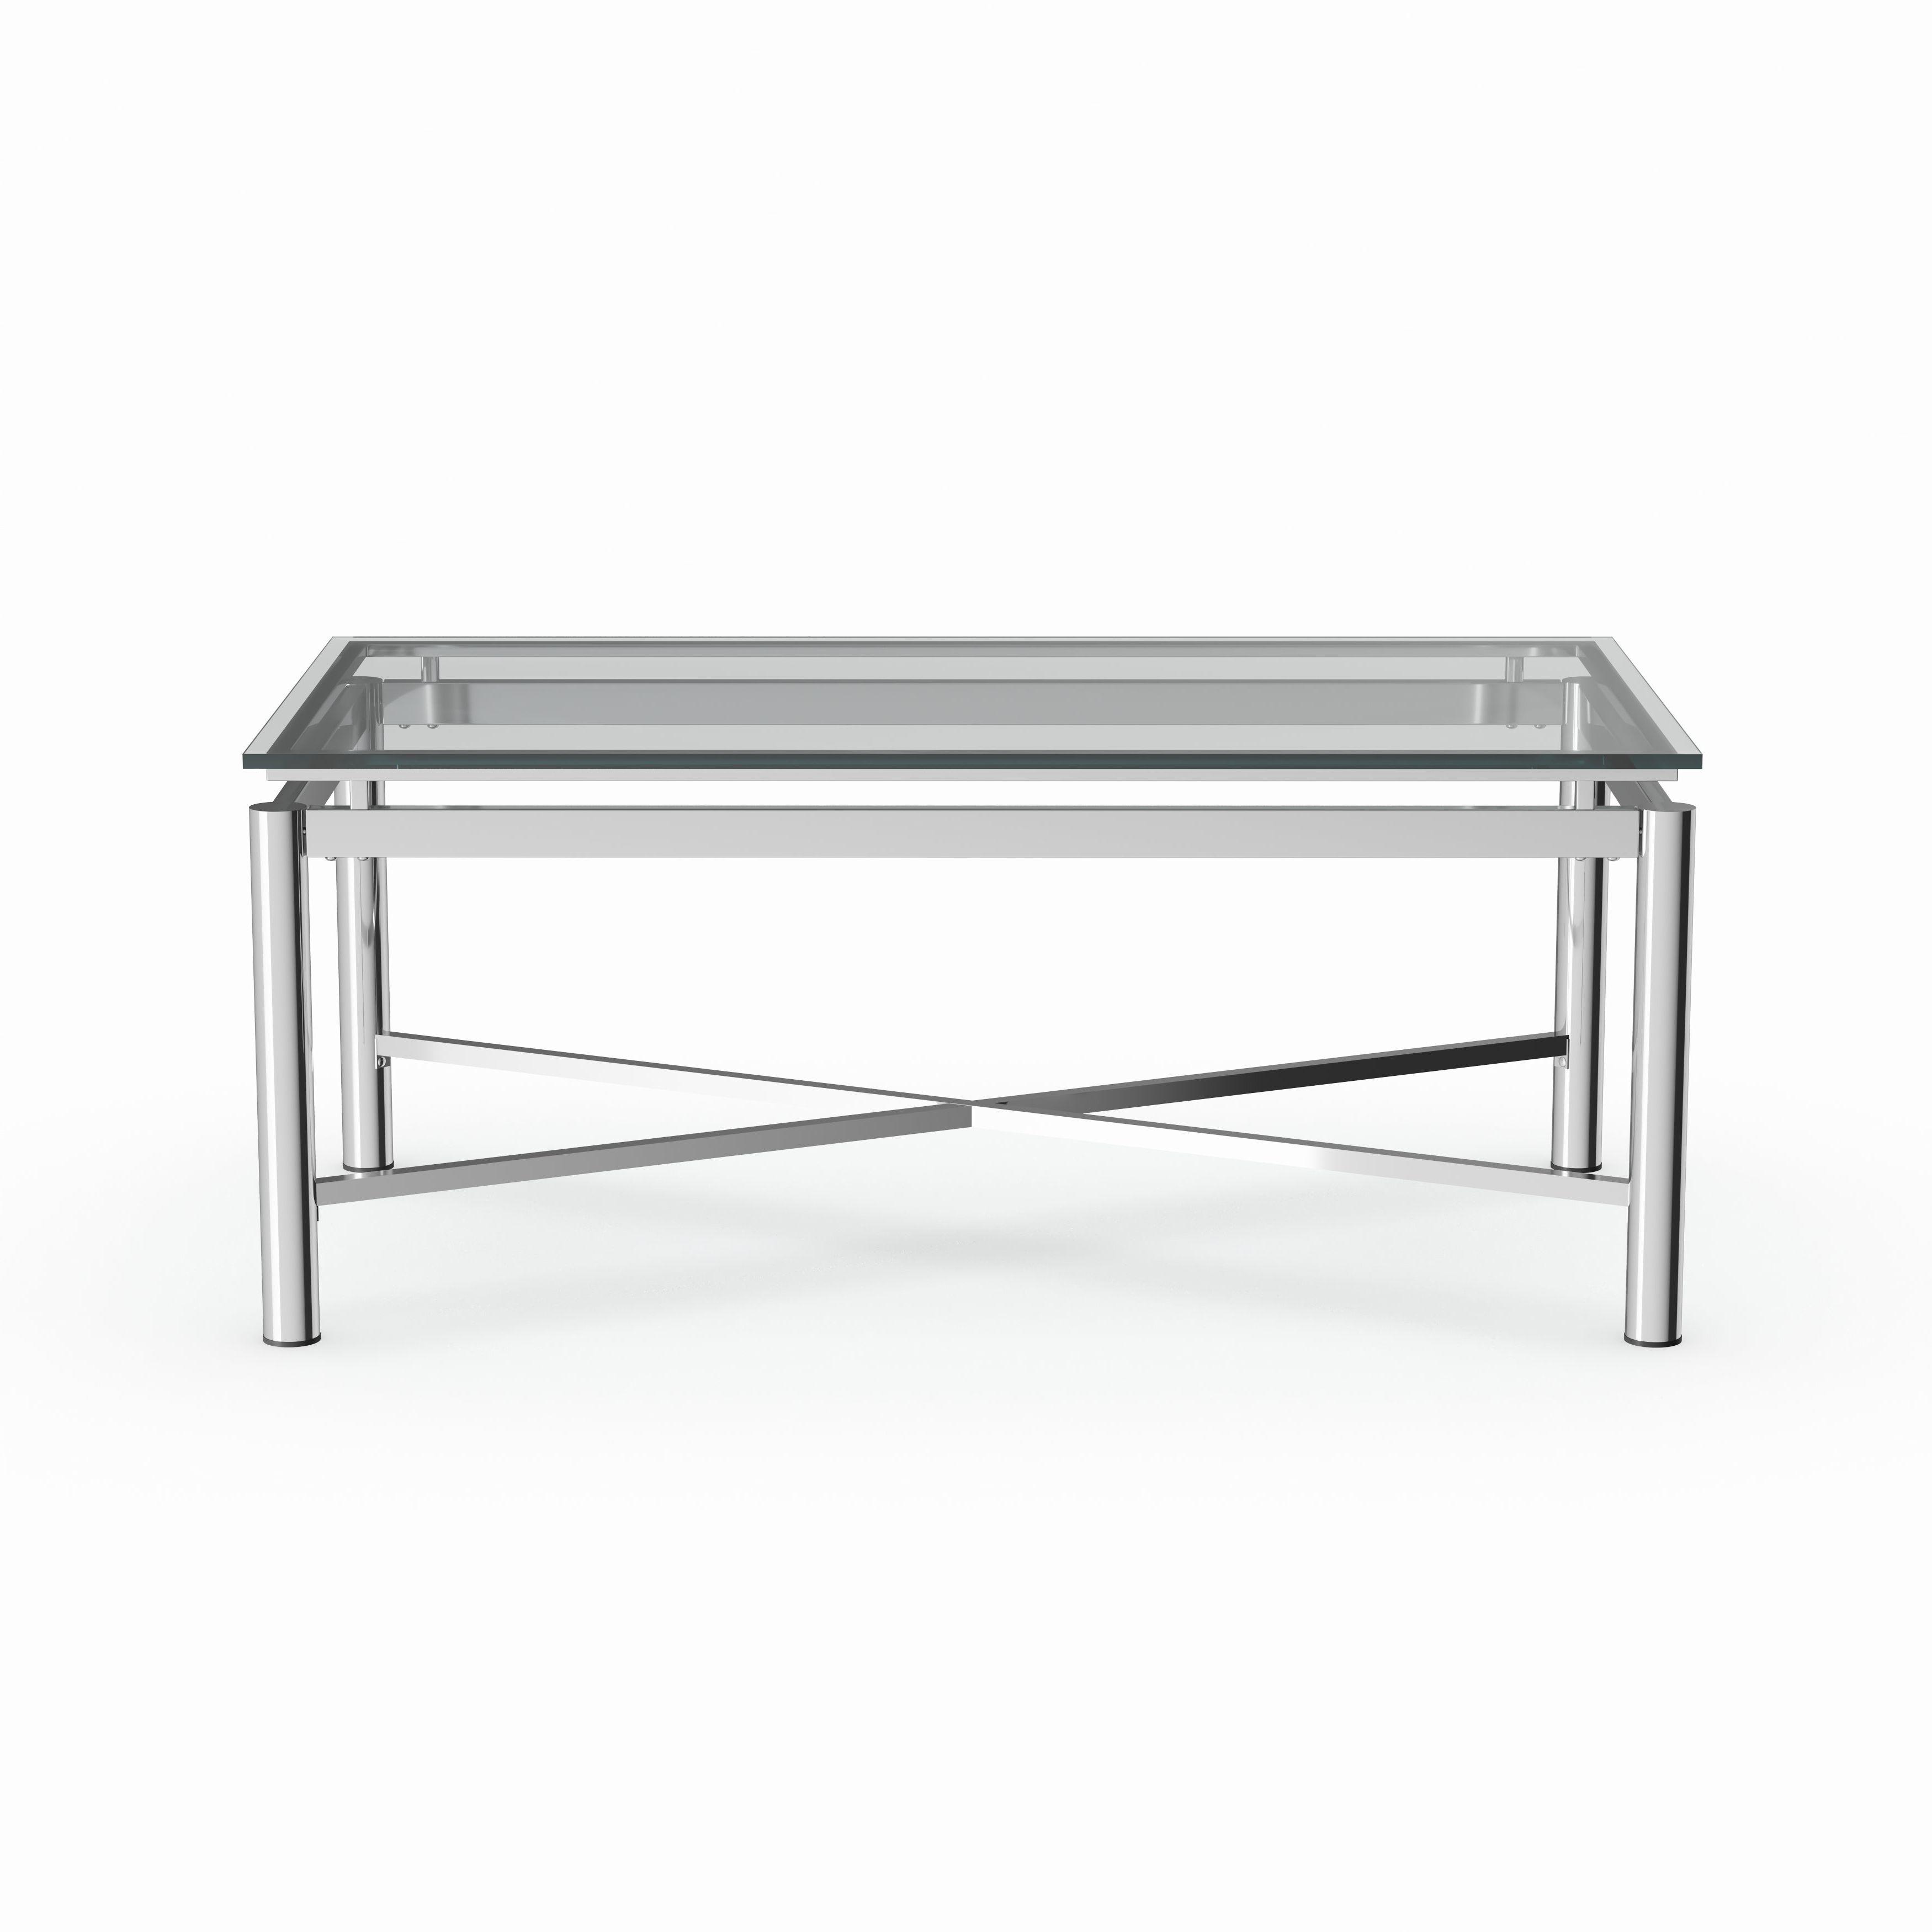 Strick & Bolton Jules Chrome And Glass Coffee Table Pertaining To Popular Strick & Bolton Jules Chrome And Glass Coffee Tables (View 5 of 20)